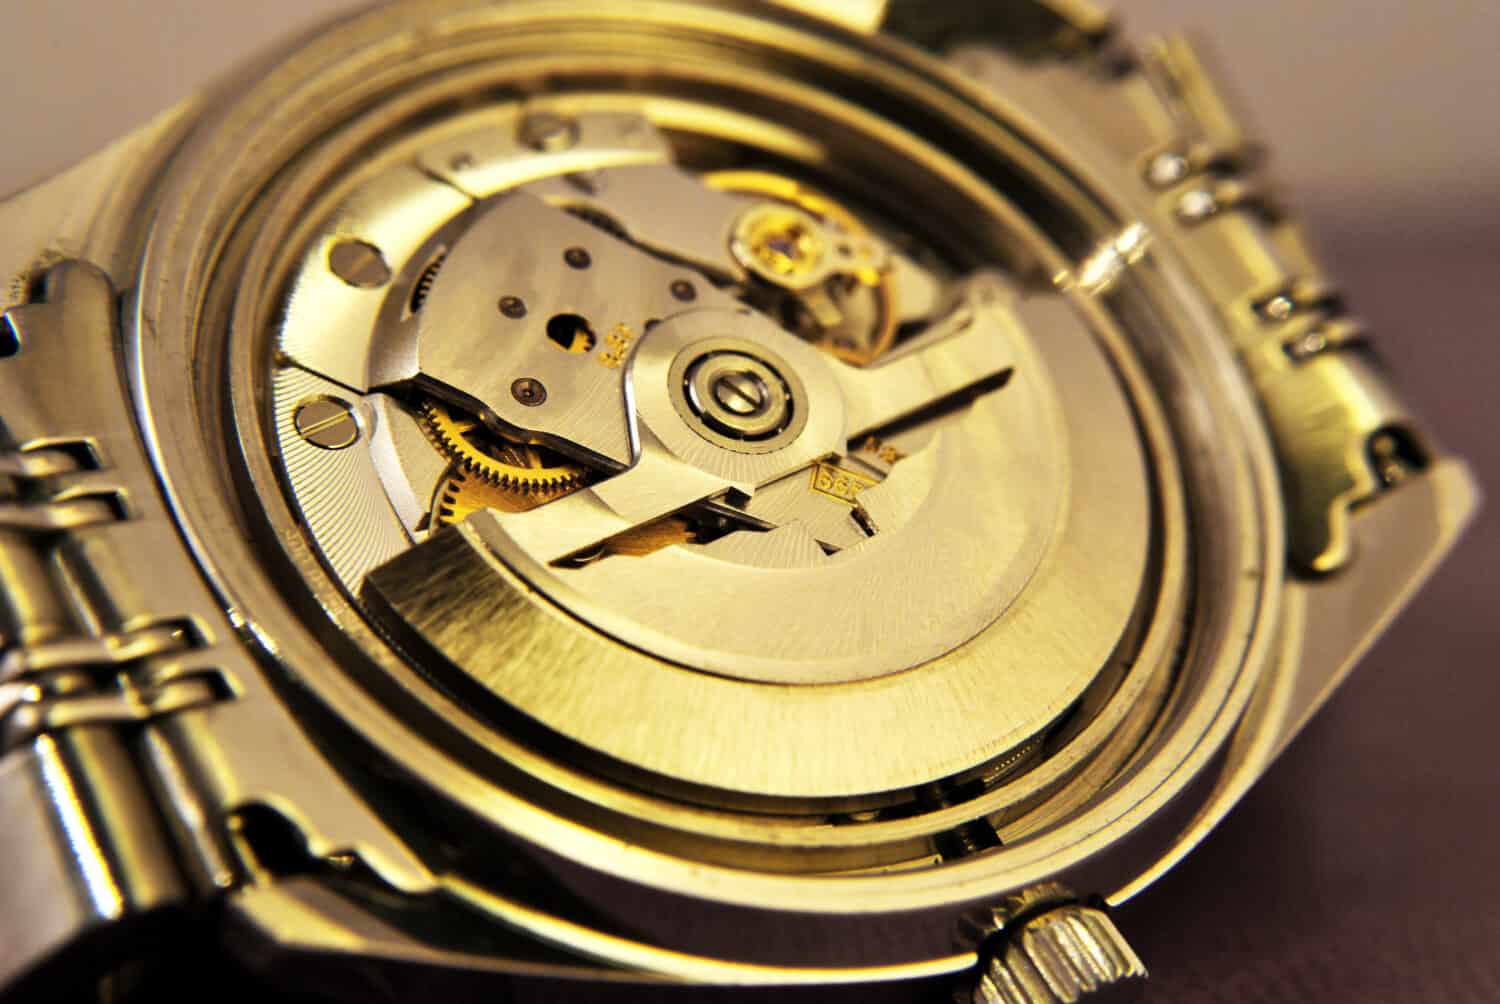 Gears and mainspring in the mechanism of automtic watch